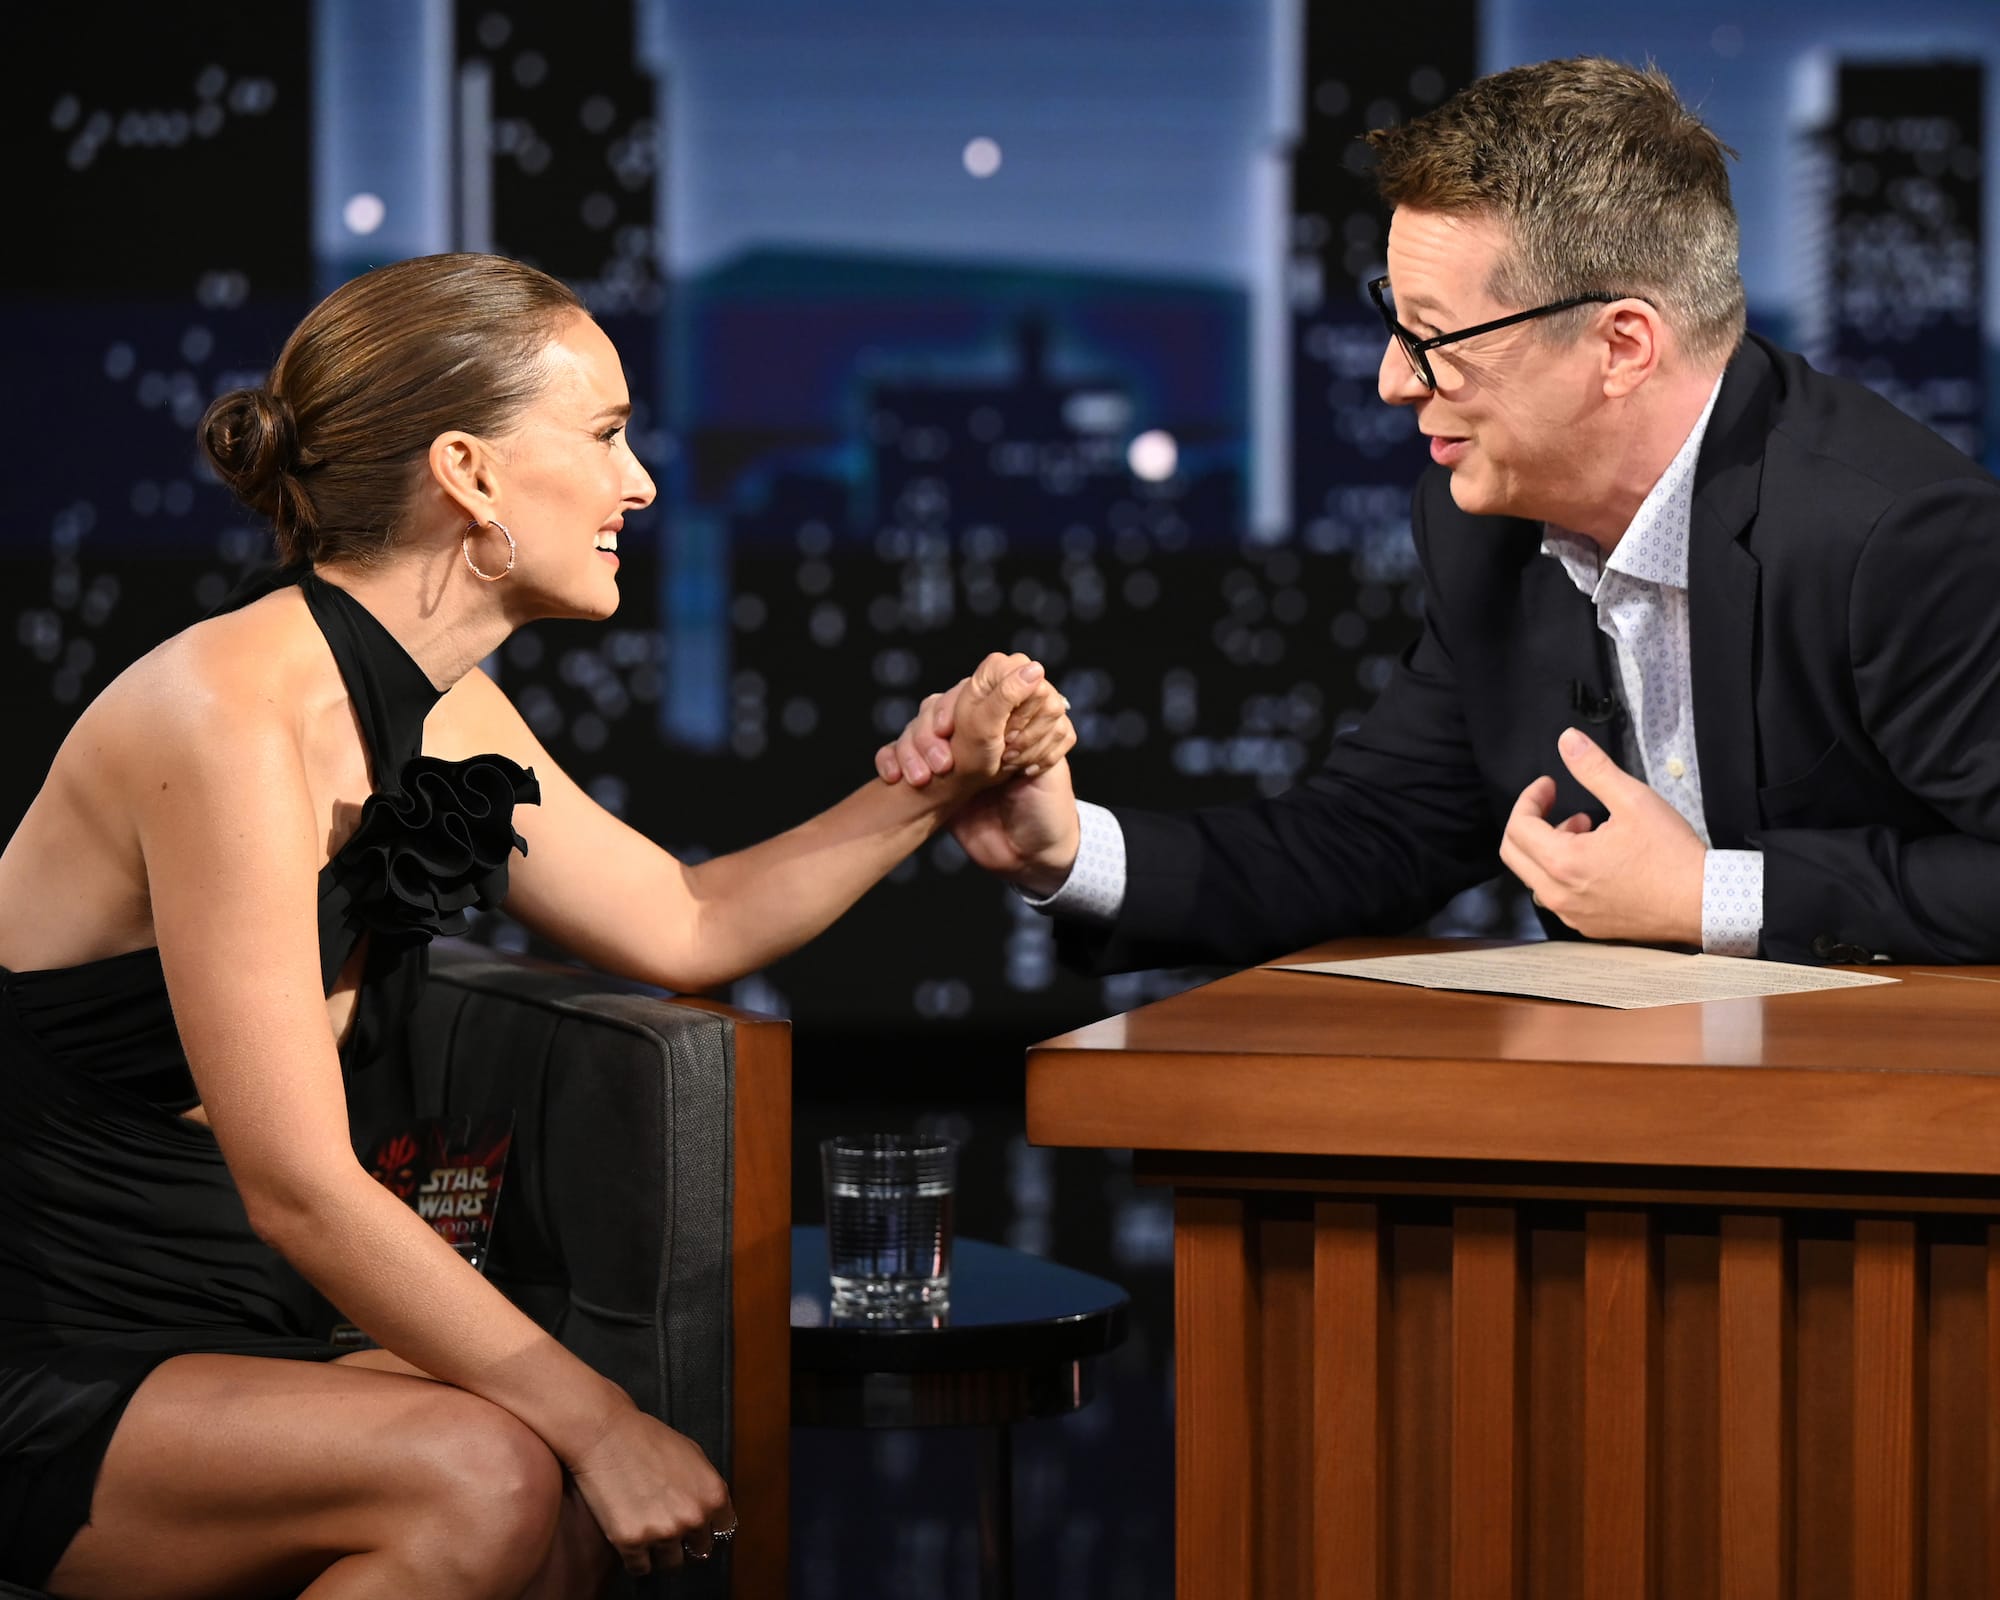 Natalie Portman talking to the guest host Sean Hayes during Jimmy Kimmel Live show on June 23, 2022.